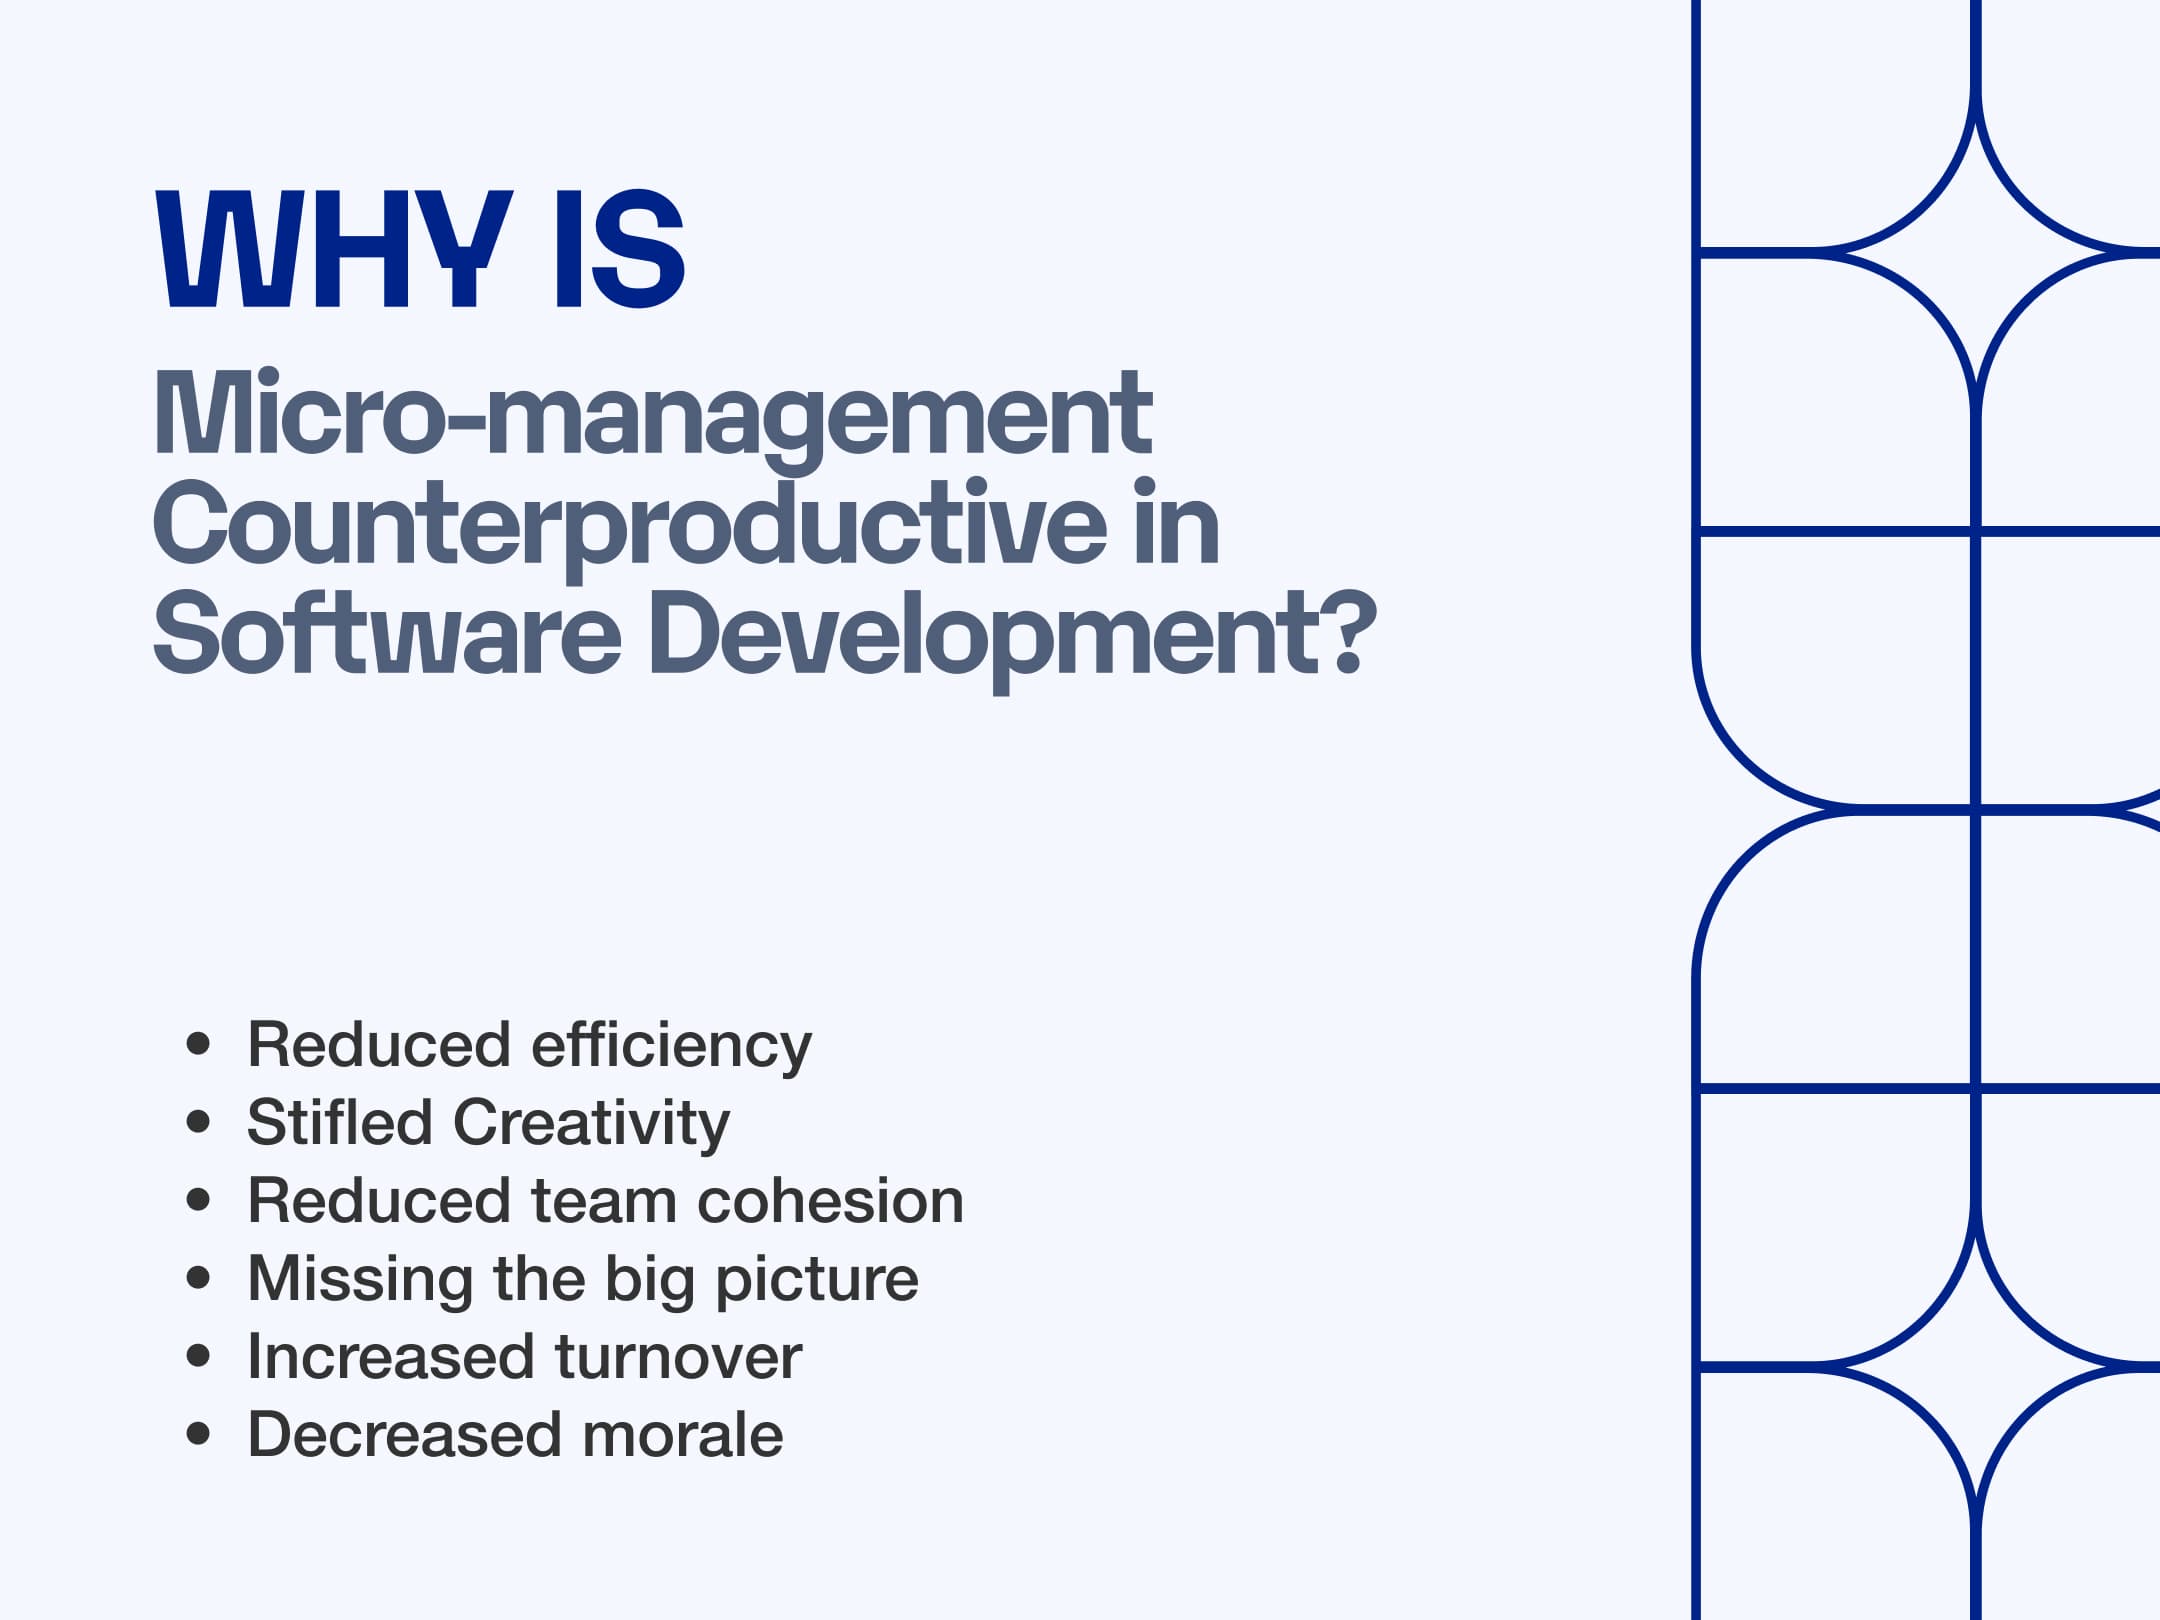 Why is Micro-management Counterproductive in Software Development?